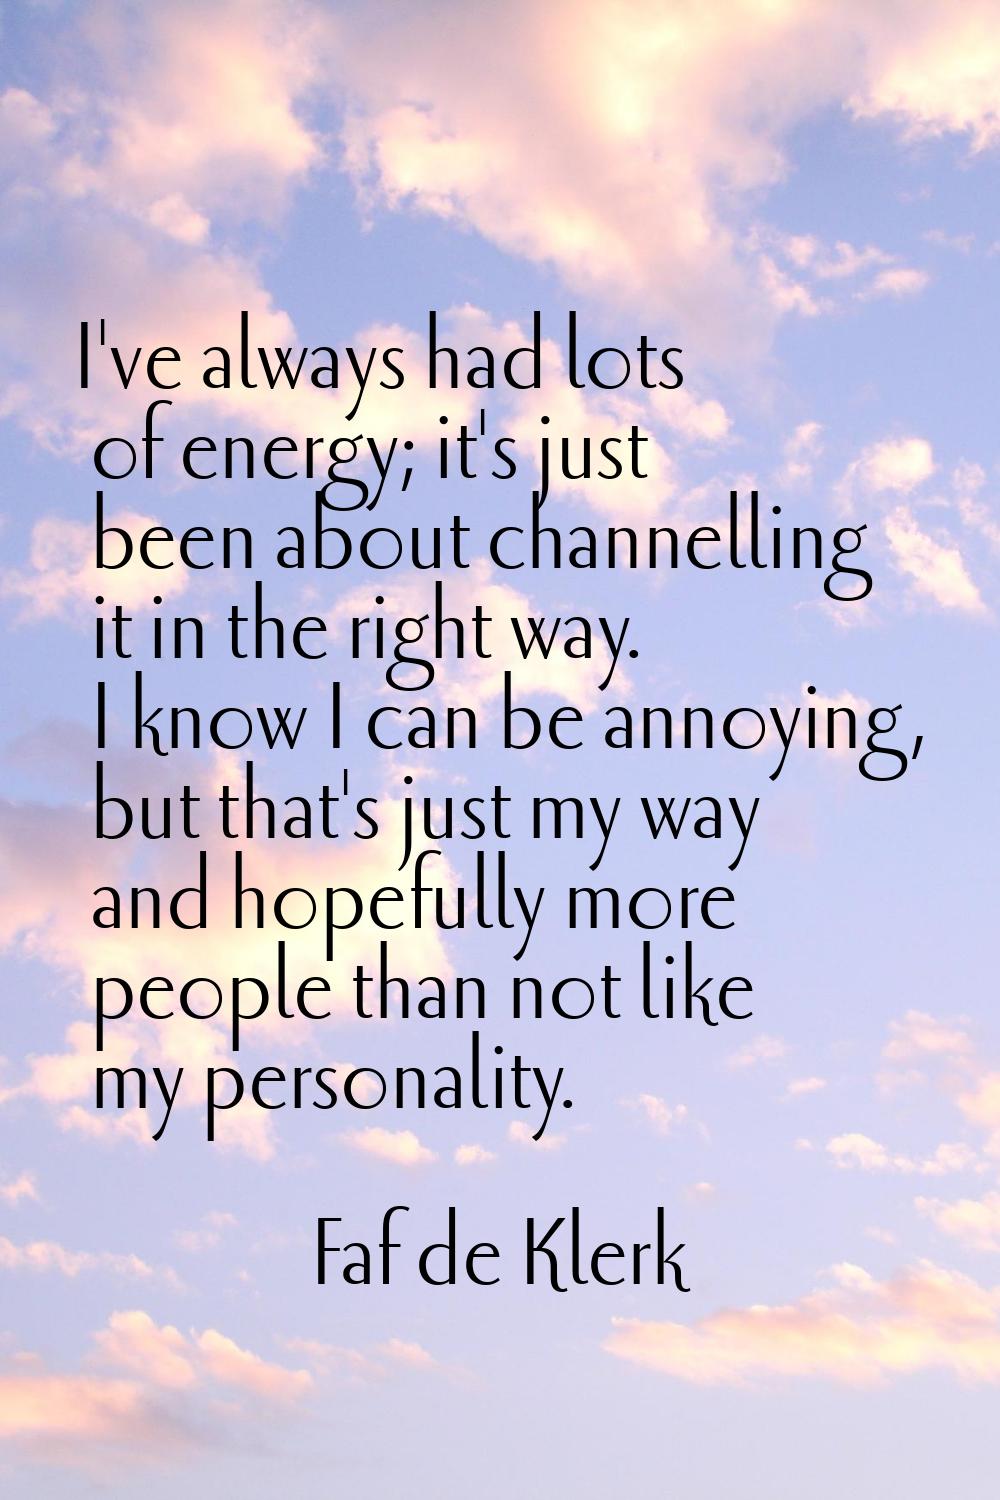 I've always had lots of energy; it's just been about channelling it in the right way. I know I can 